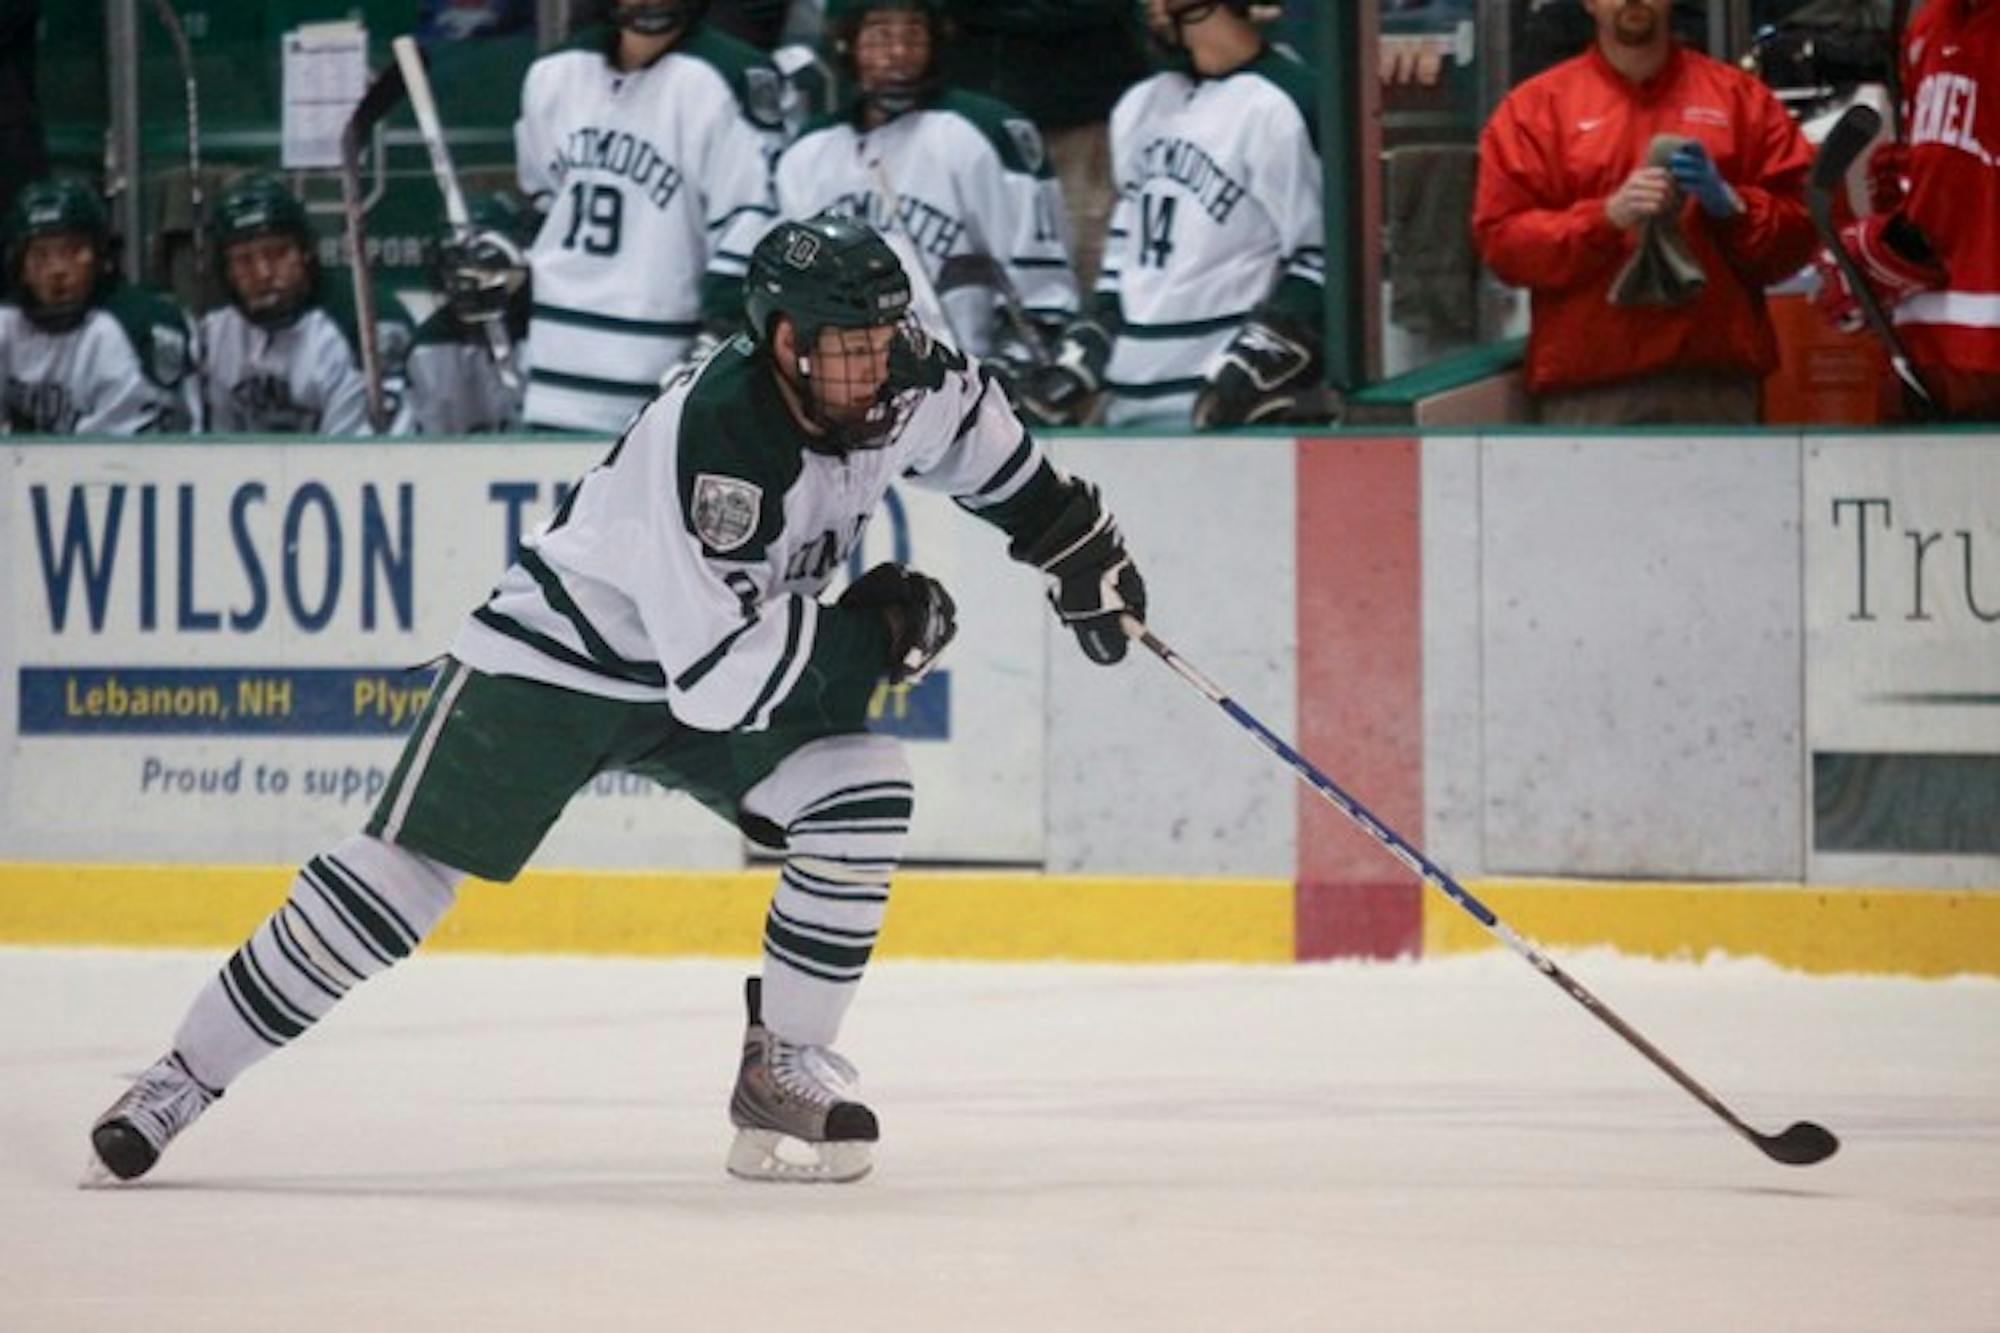 Dartmouth men's hockey team sqeaked out a win against Cornell this weekend, but lost to Colgate University.